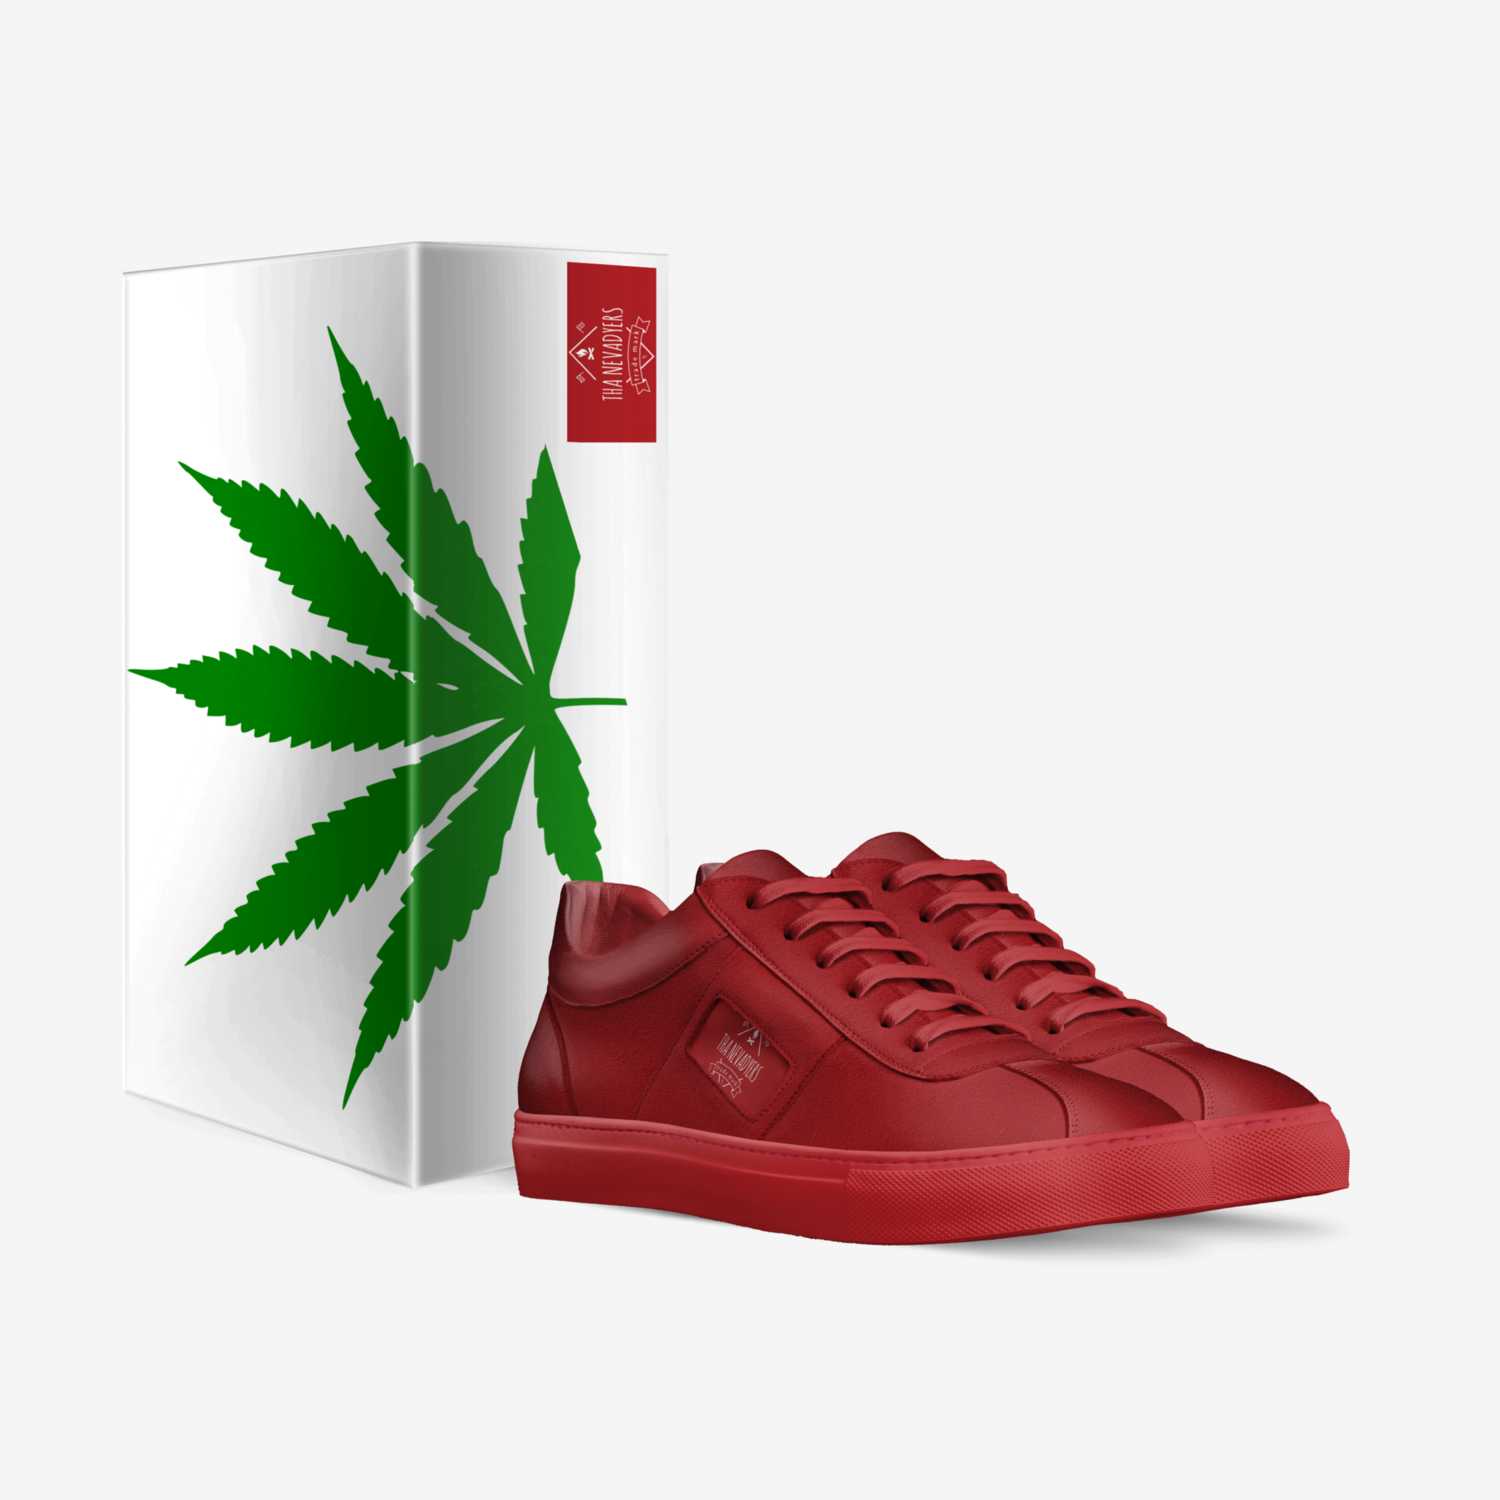 Strawberry Cough custom made in Italy shoes by Galatikz Dixon | Box view